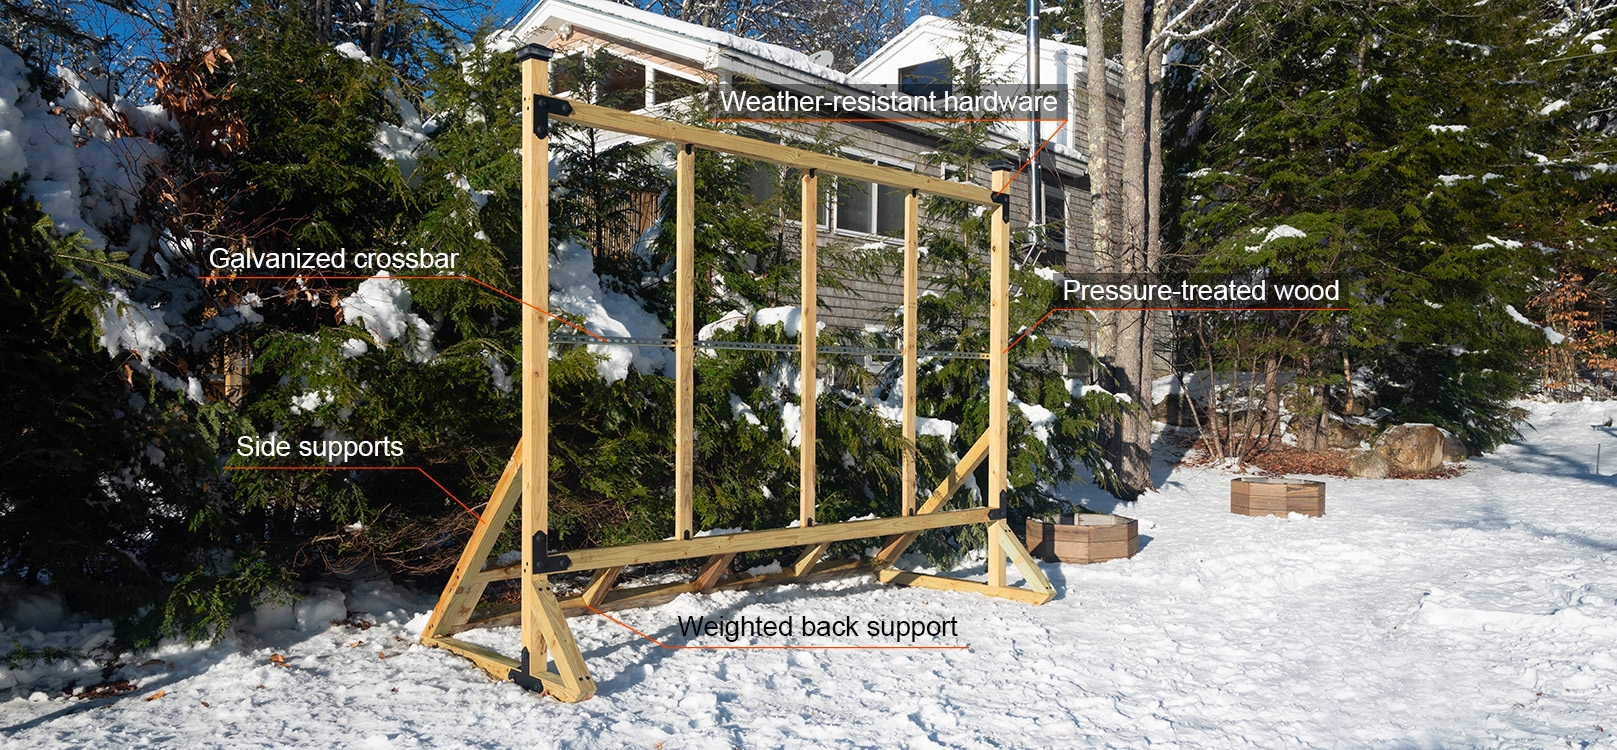 Timberline Movable Screen Frame and Wired Outdoor Movie Theater setup in the winter.